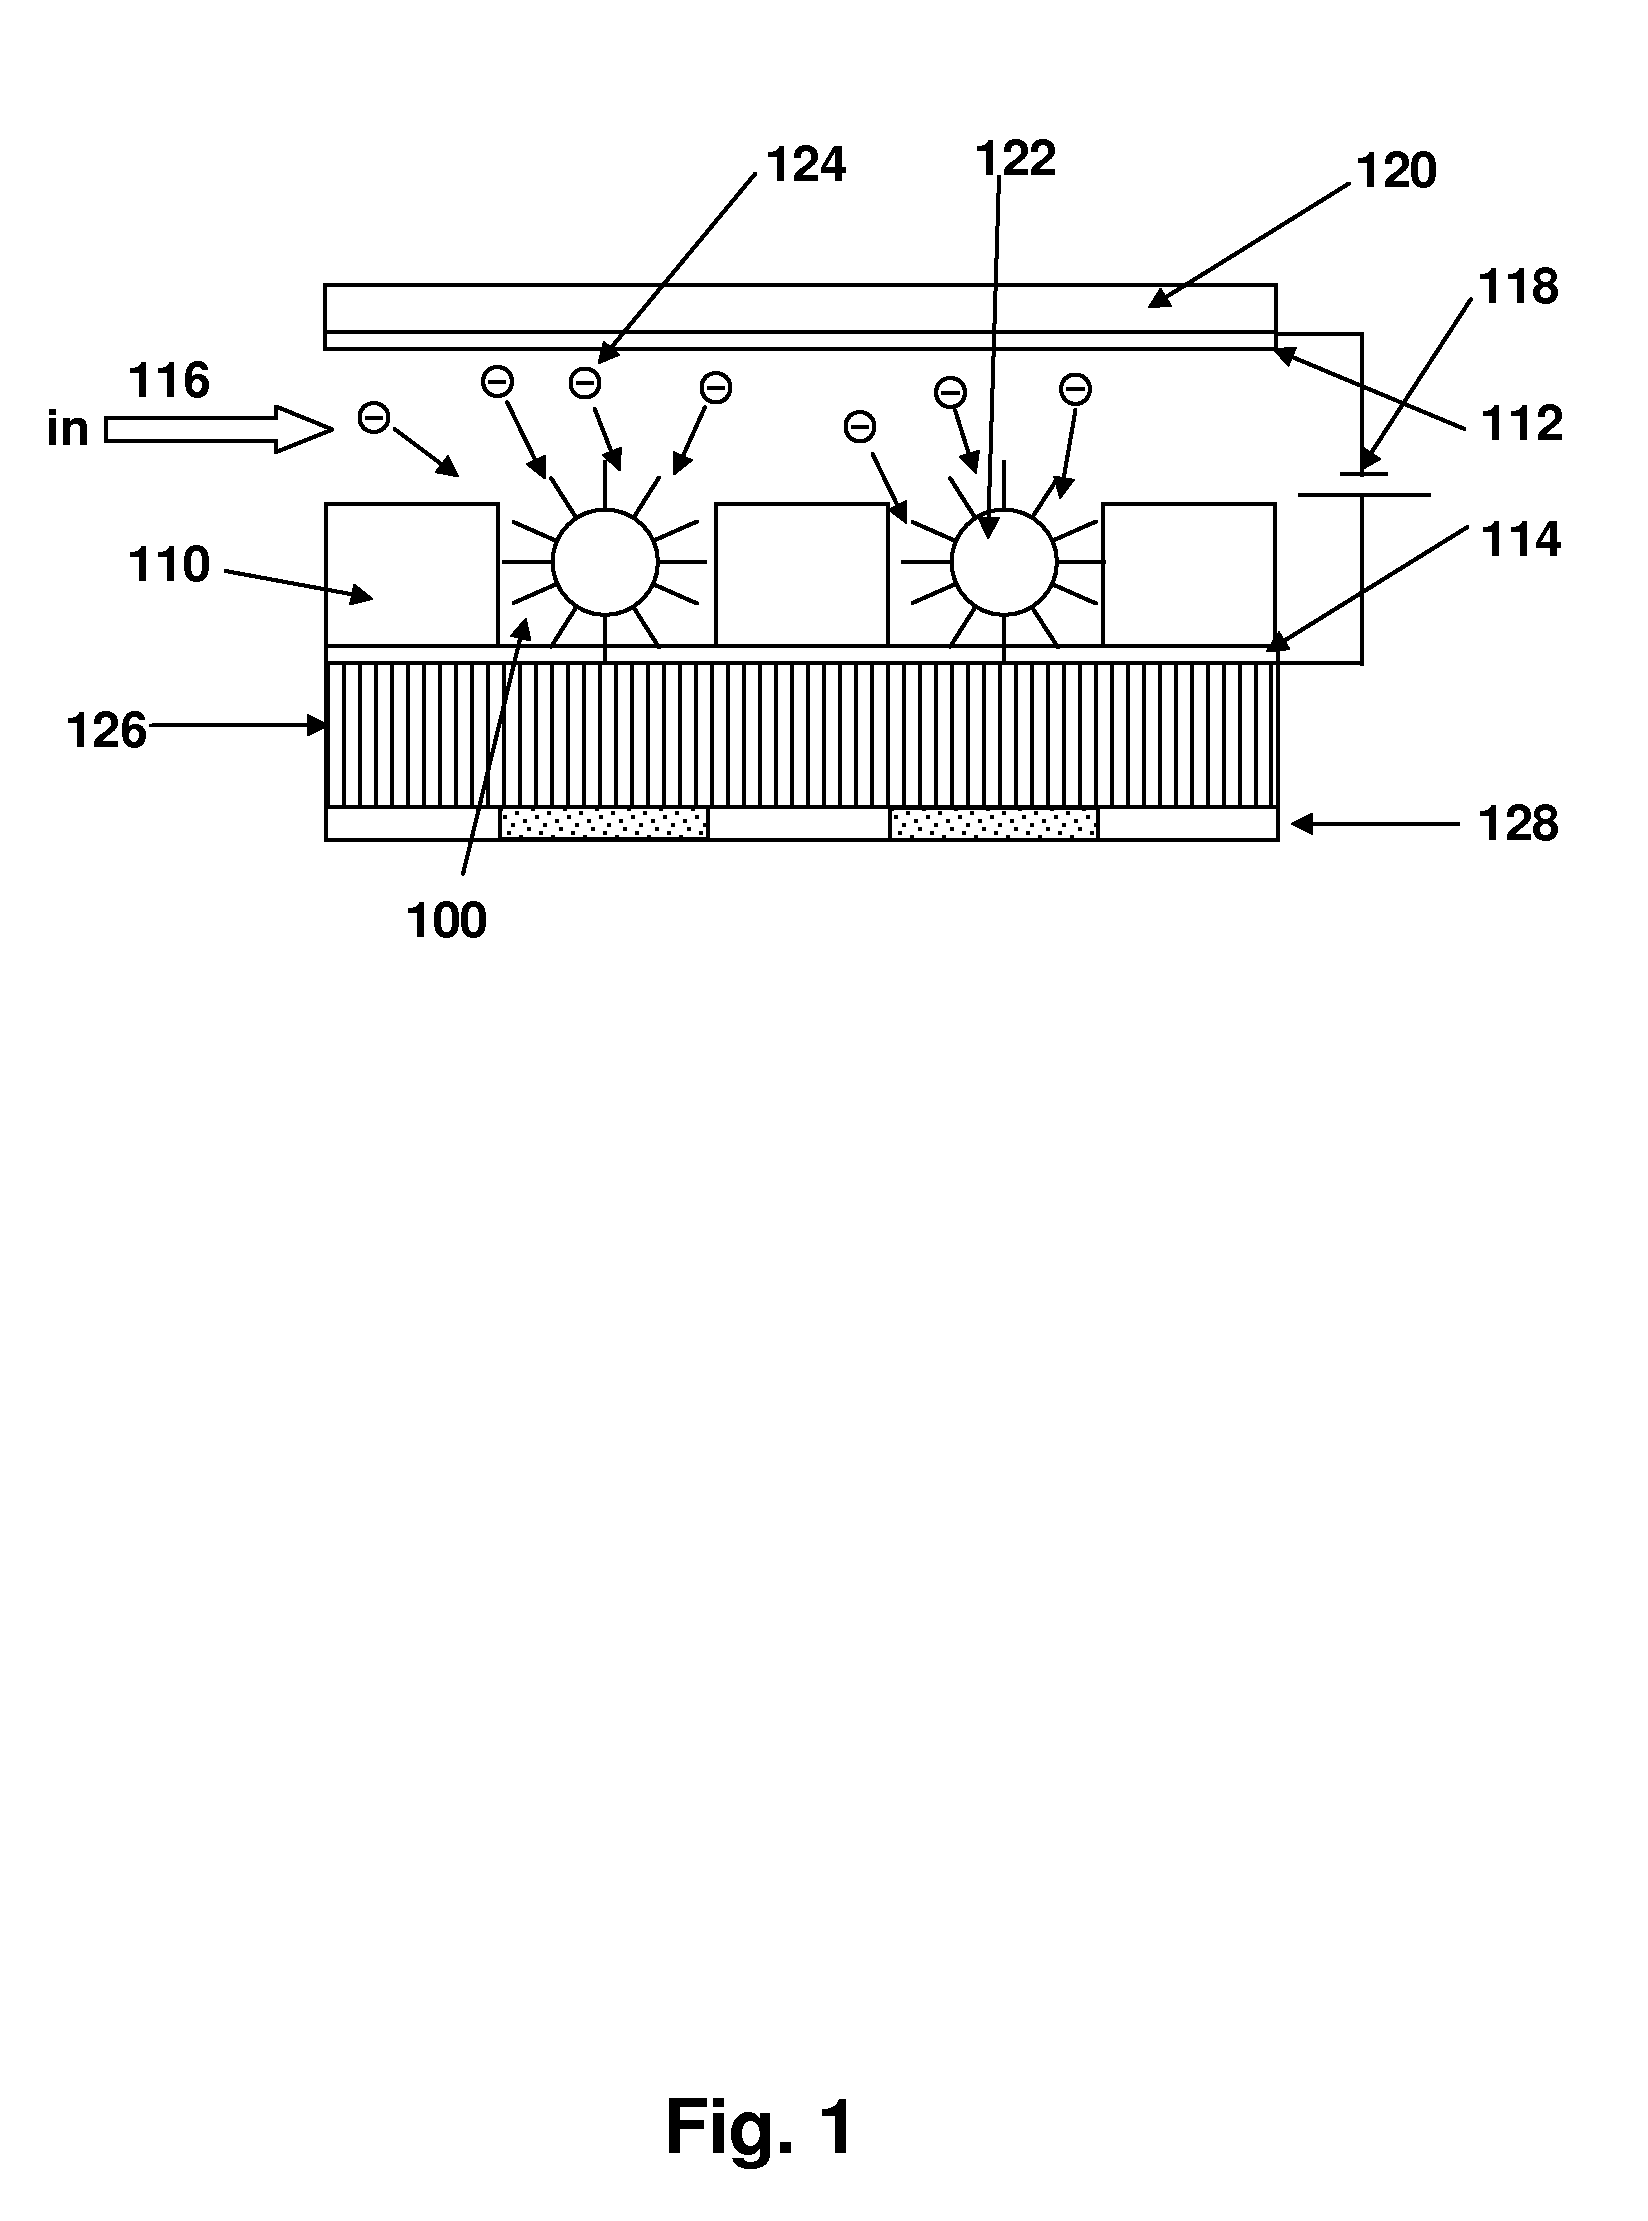 Method and apparatus using electric field for improved biological assays